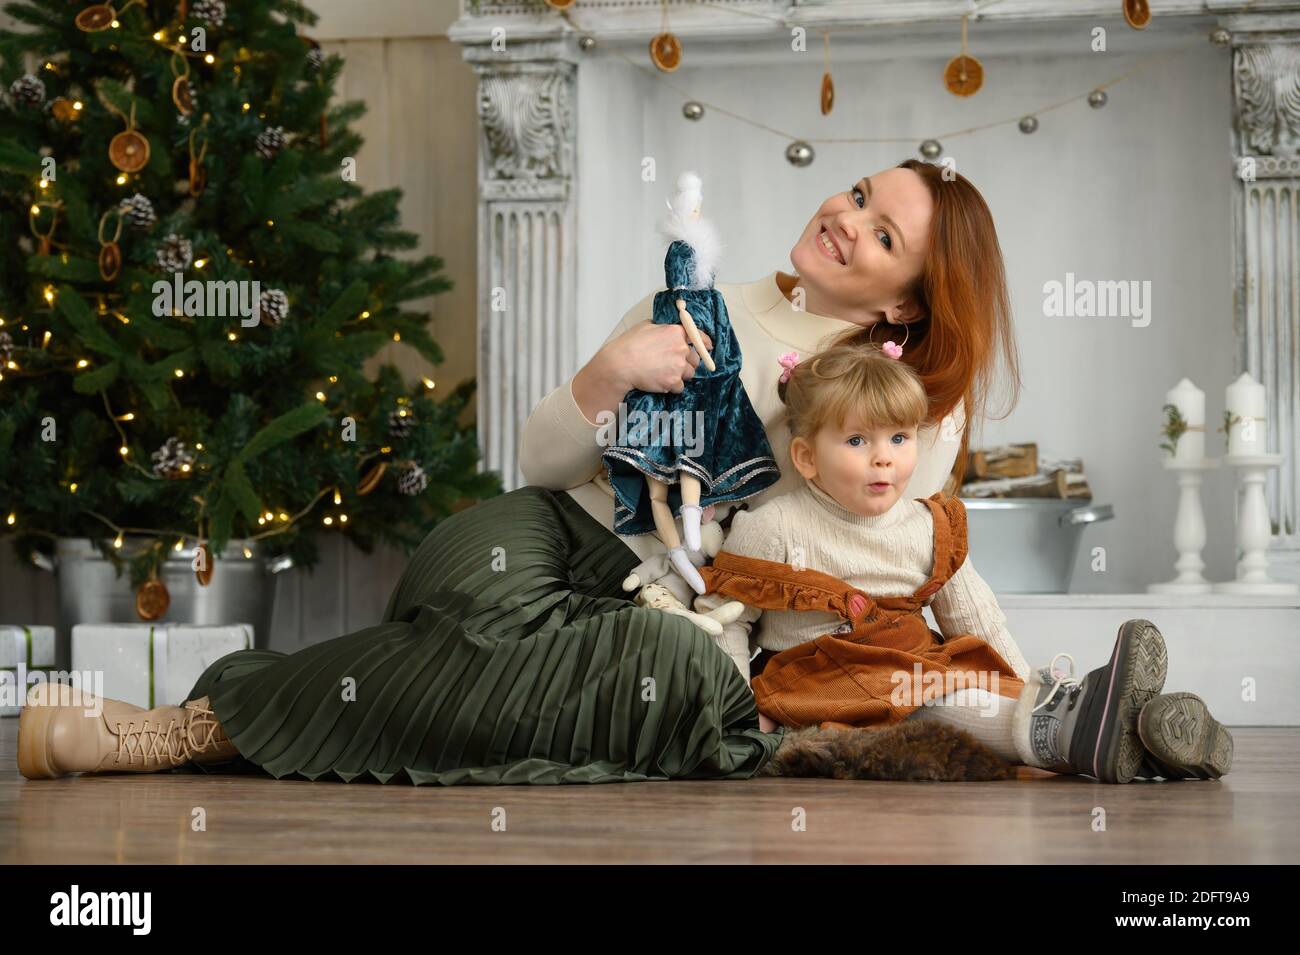 family portrait, happy mother and daughter at Christmas time Stock Photo